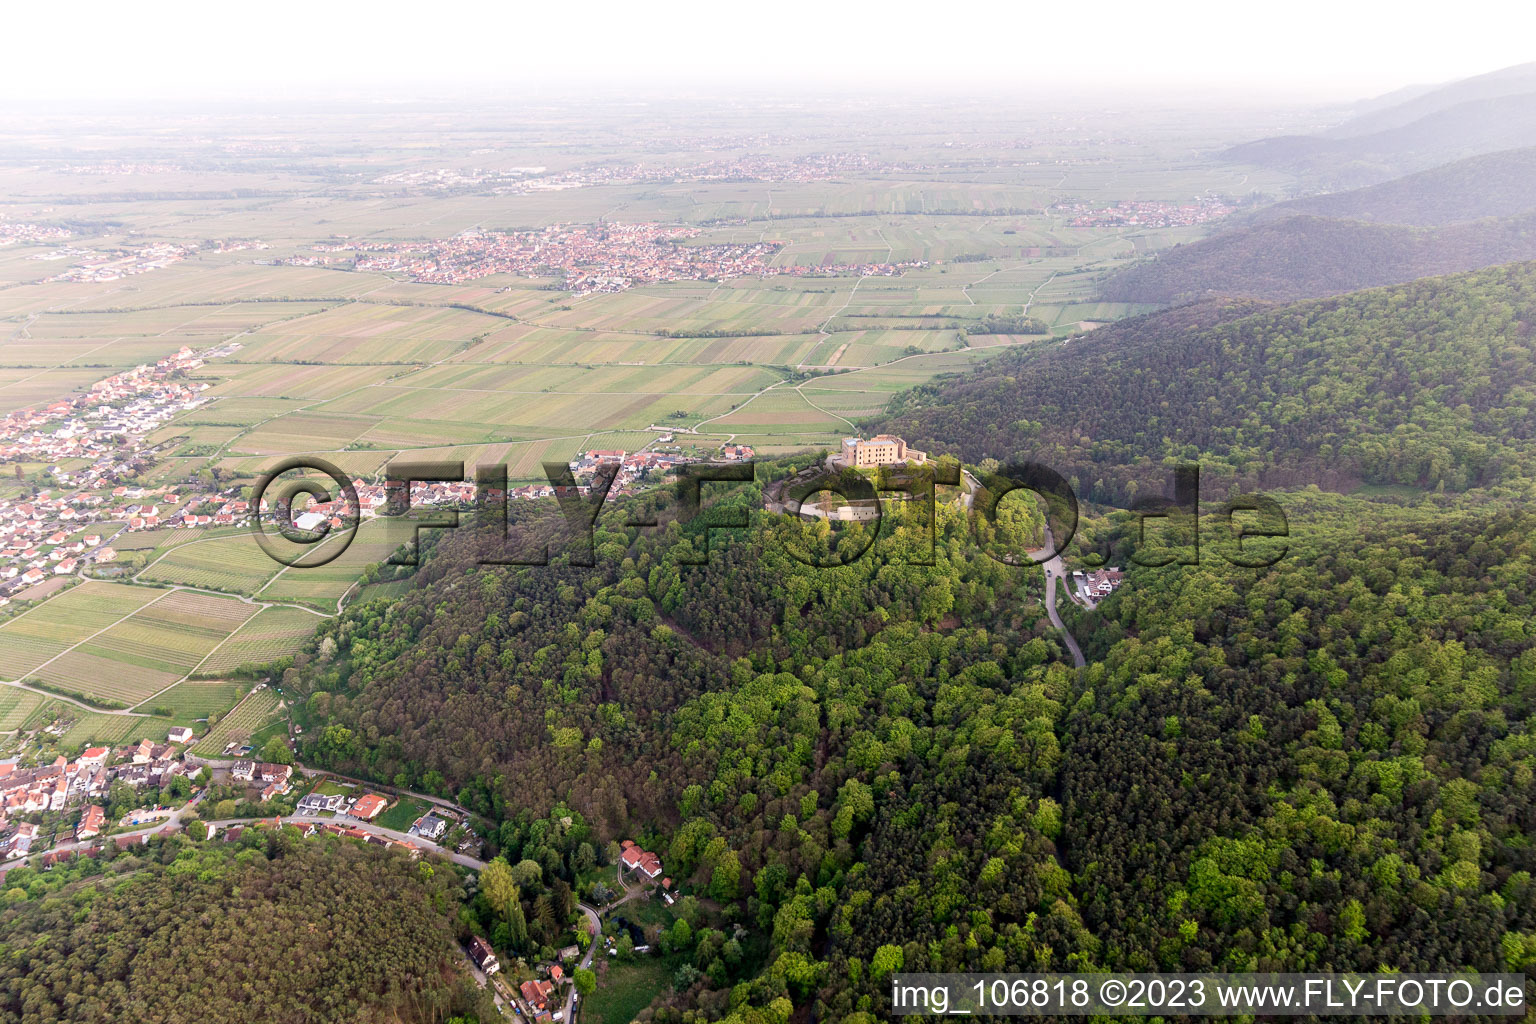 District Diedesfeld in Neustadt an der Weinstraße in the state Rhineland-Palatinate, Germany from the drone perspective